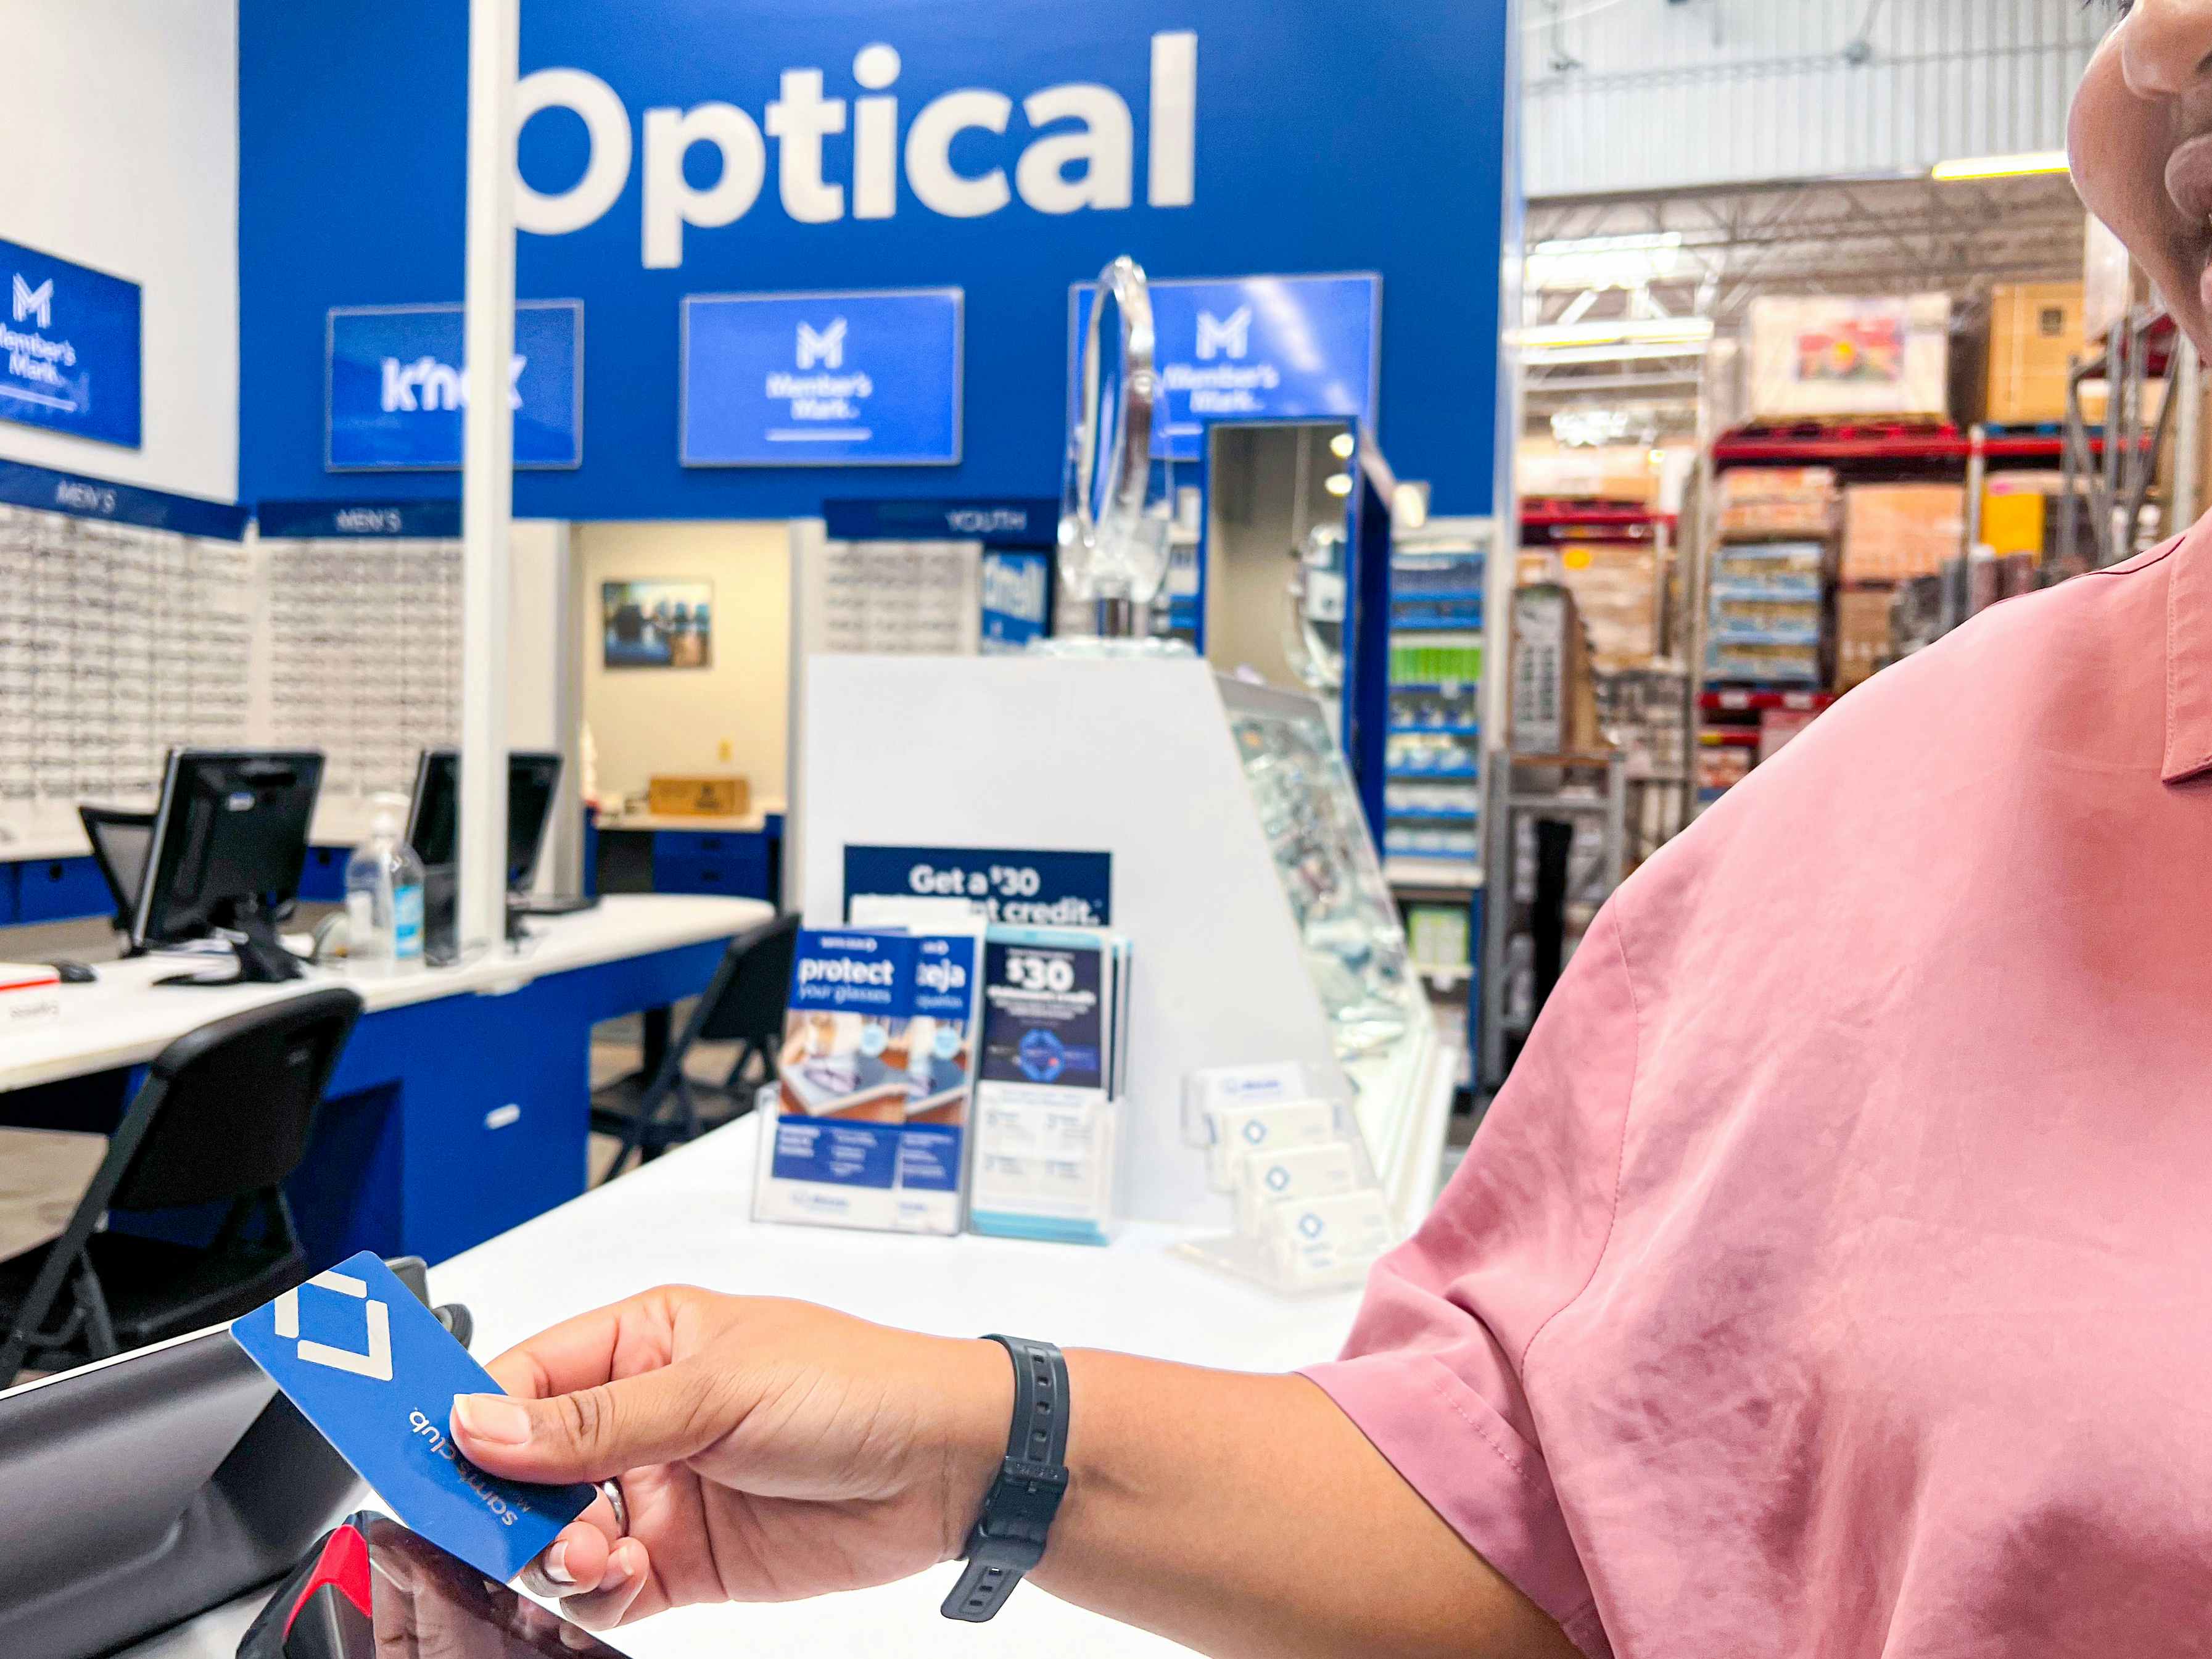 Person showing their sams club card at a point of sale system at the Optical section of Sam's Club